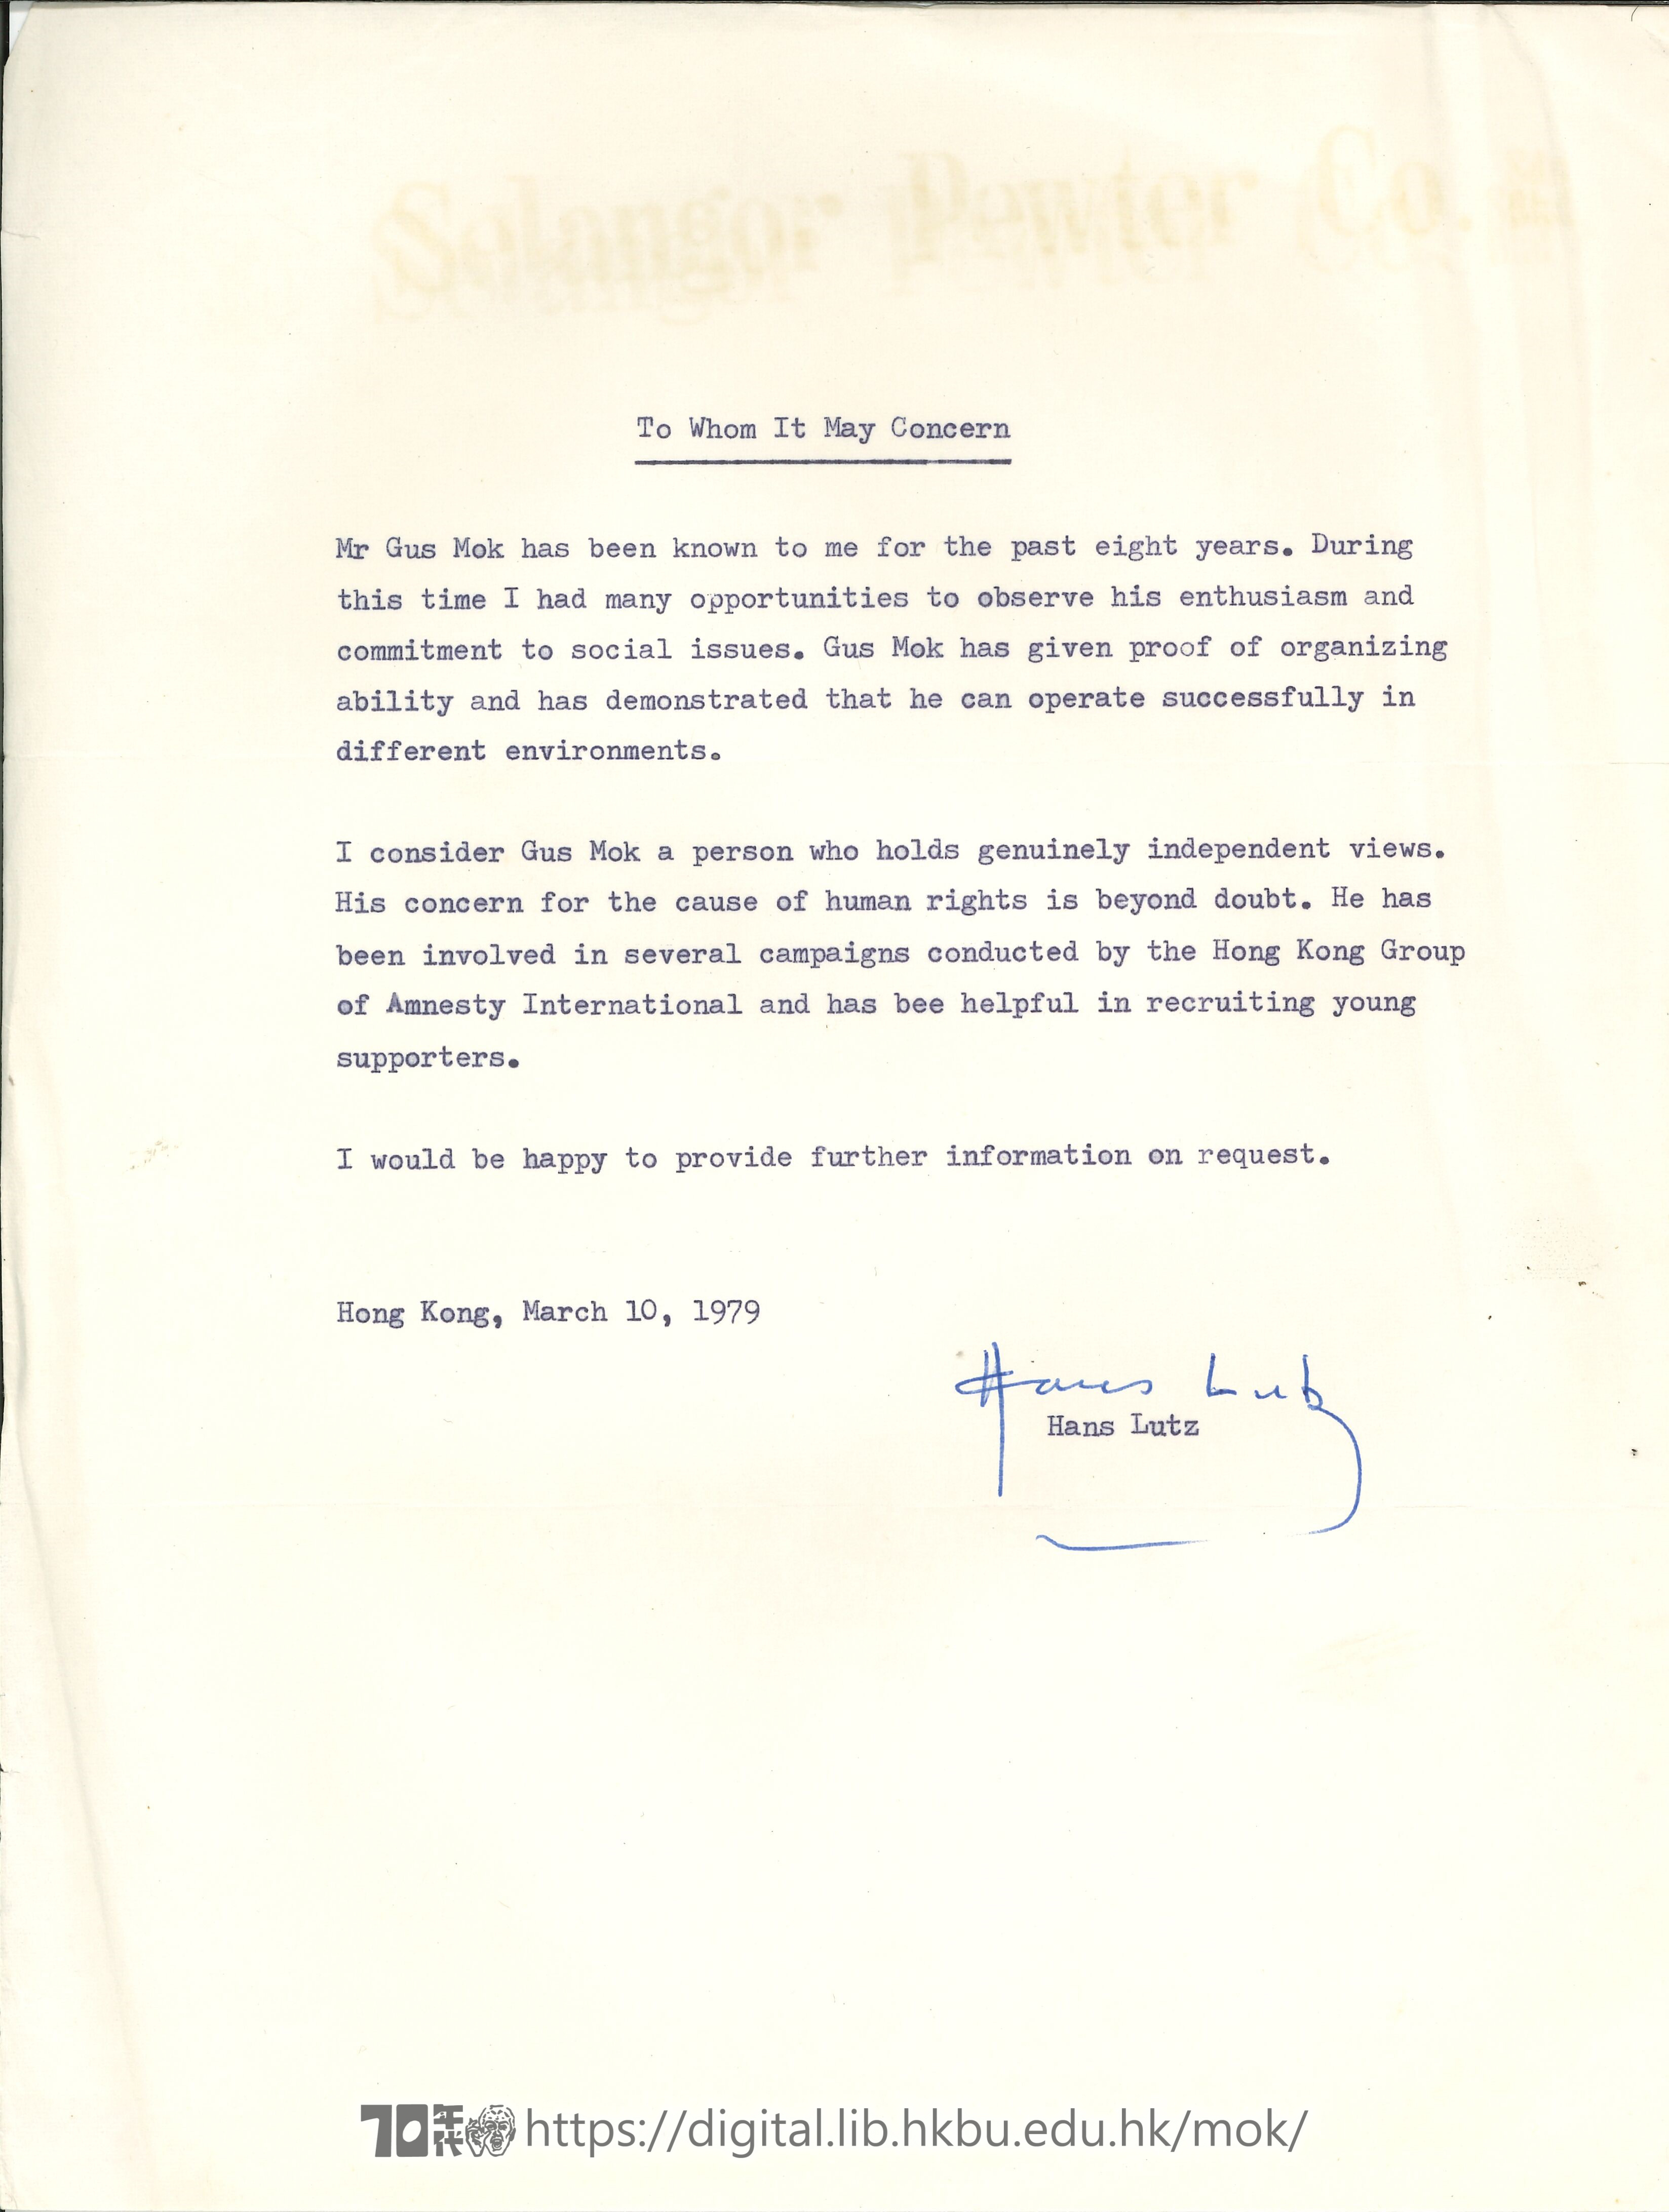   Reference Letter by Hans Lutz  